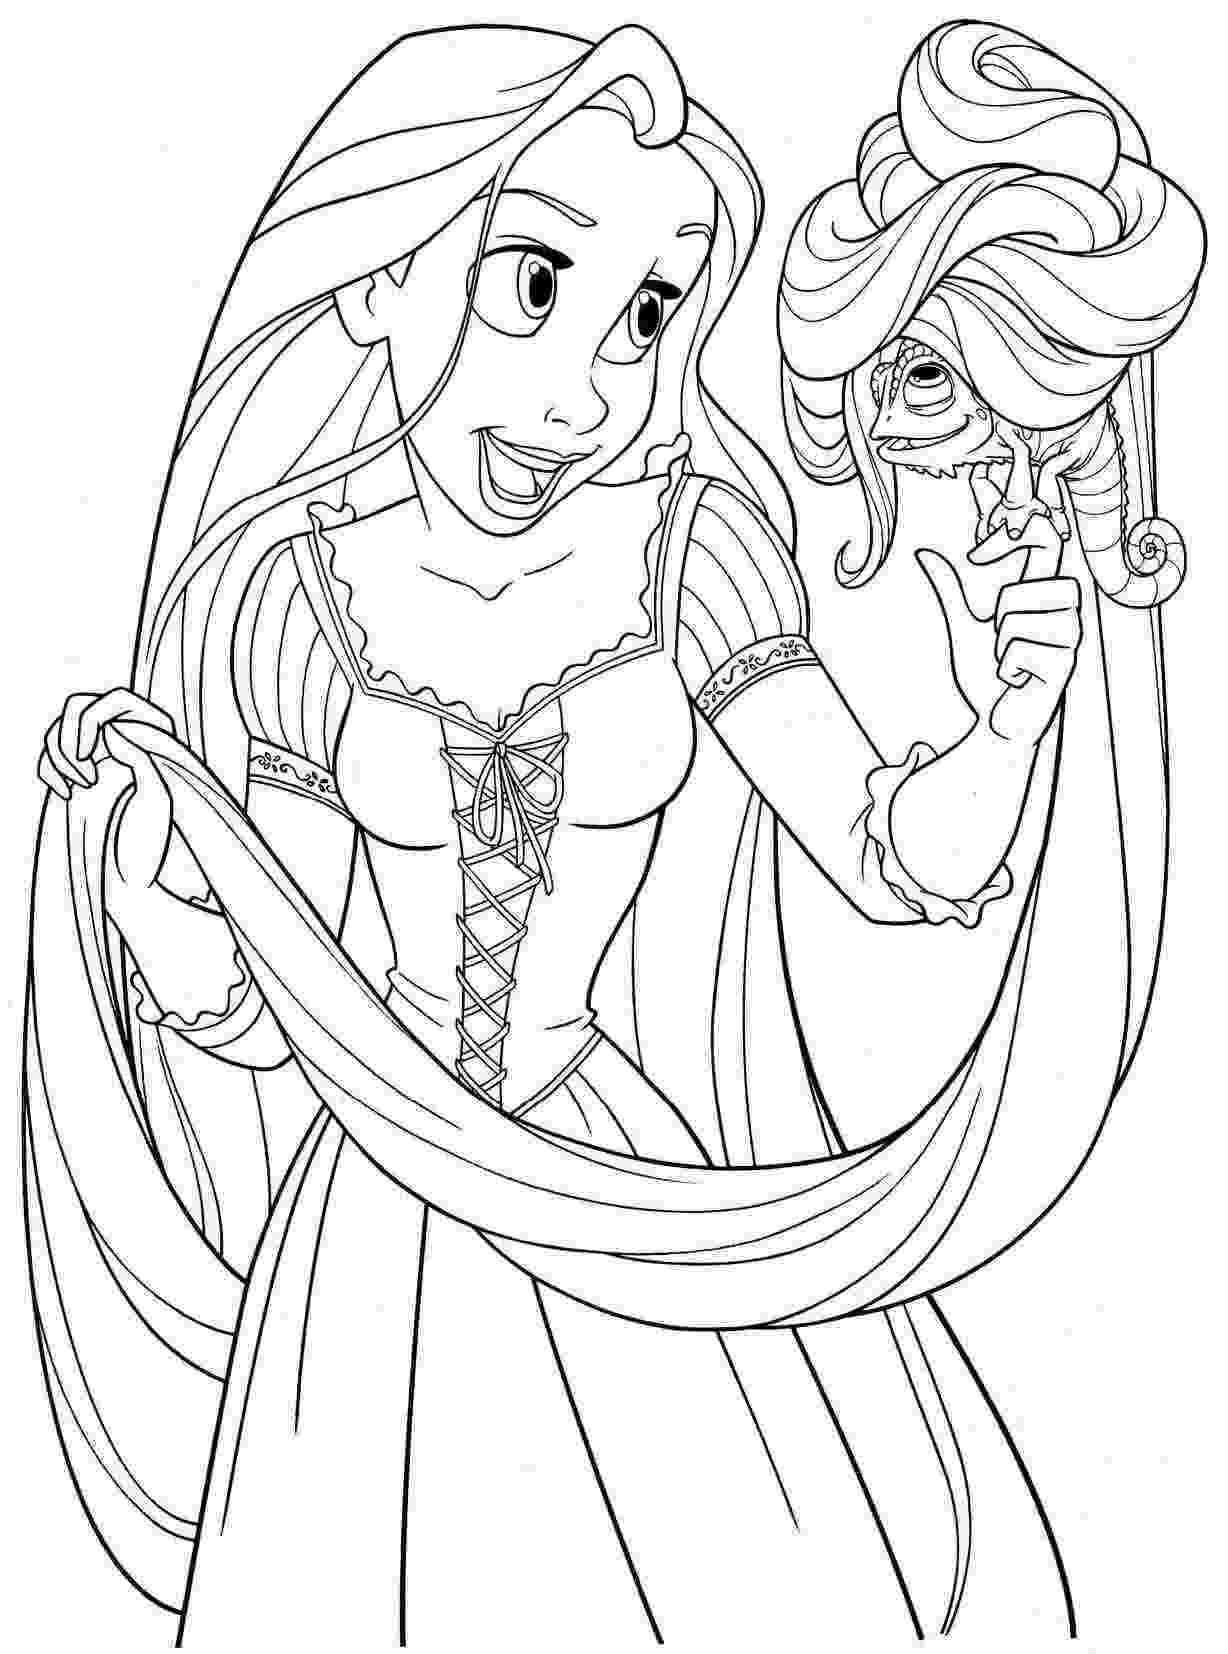 free coloring pages of all the disney princesses all disney princesses coloring pages getcoloringpagescom of disney pages coloring princesses free the all 